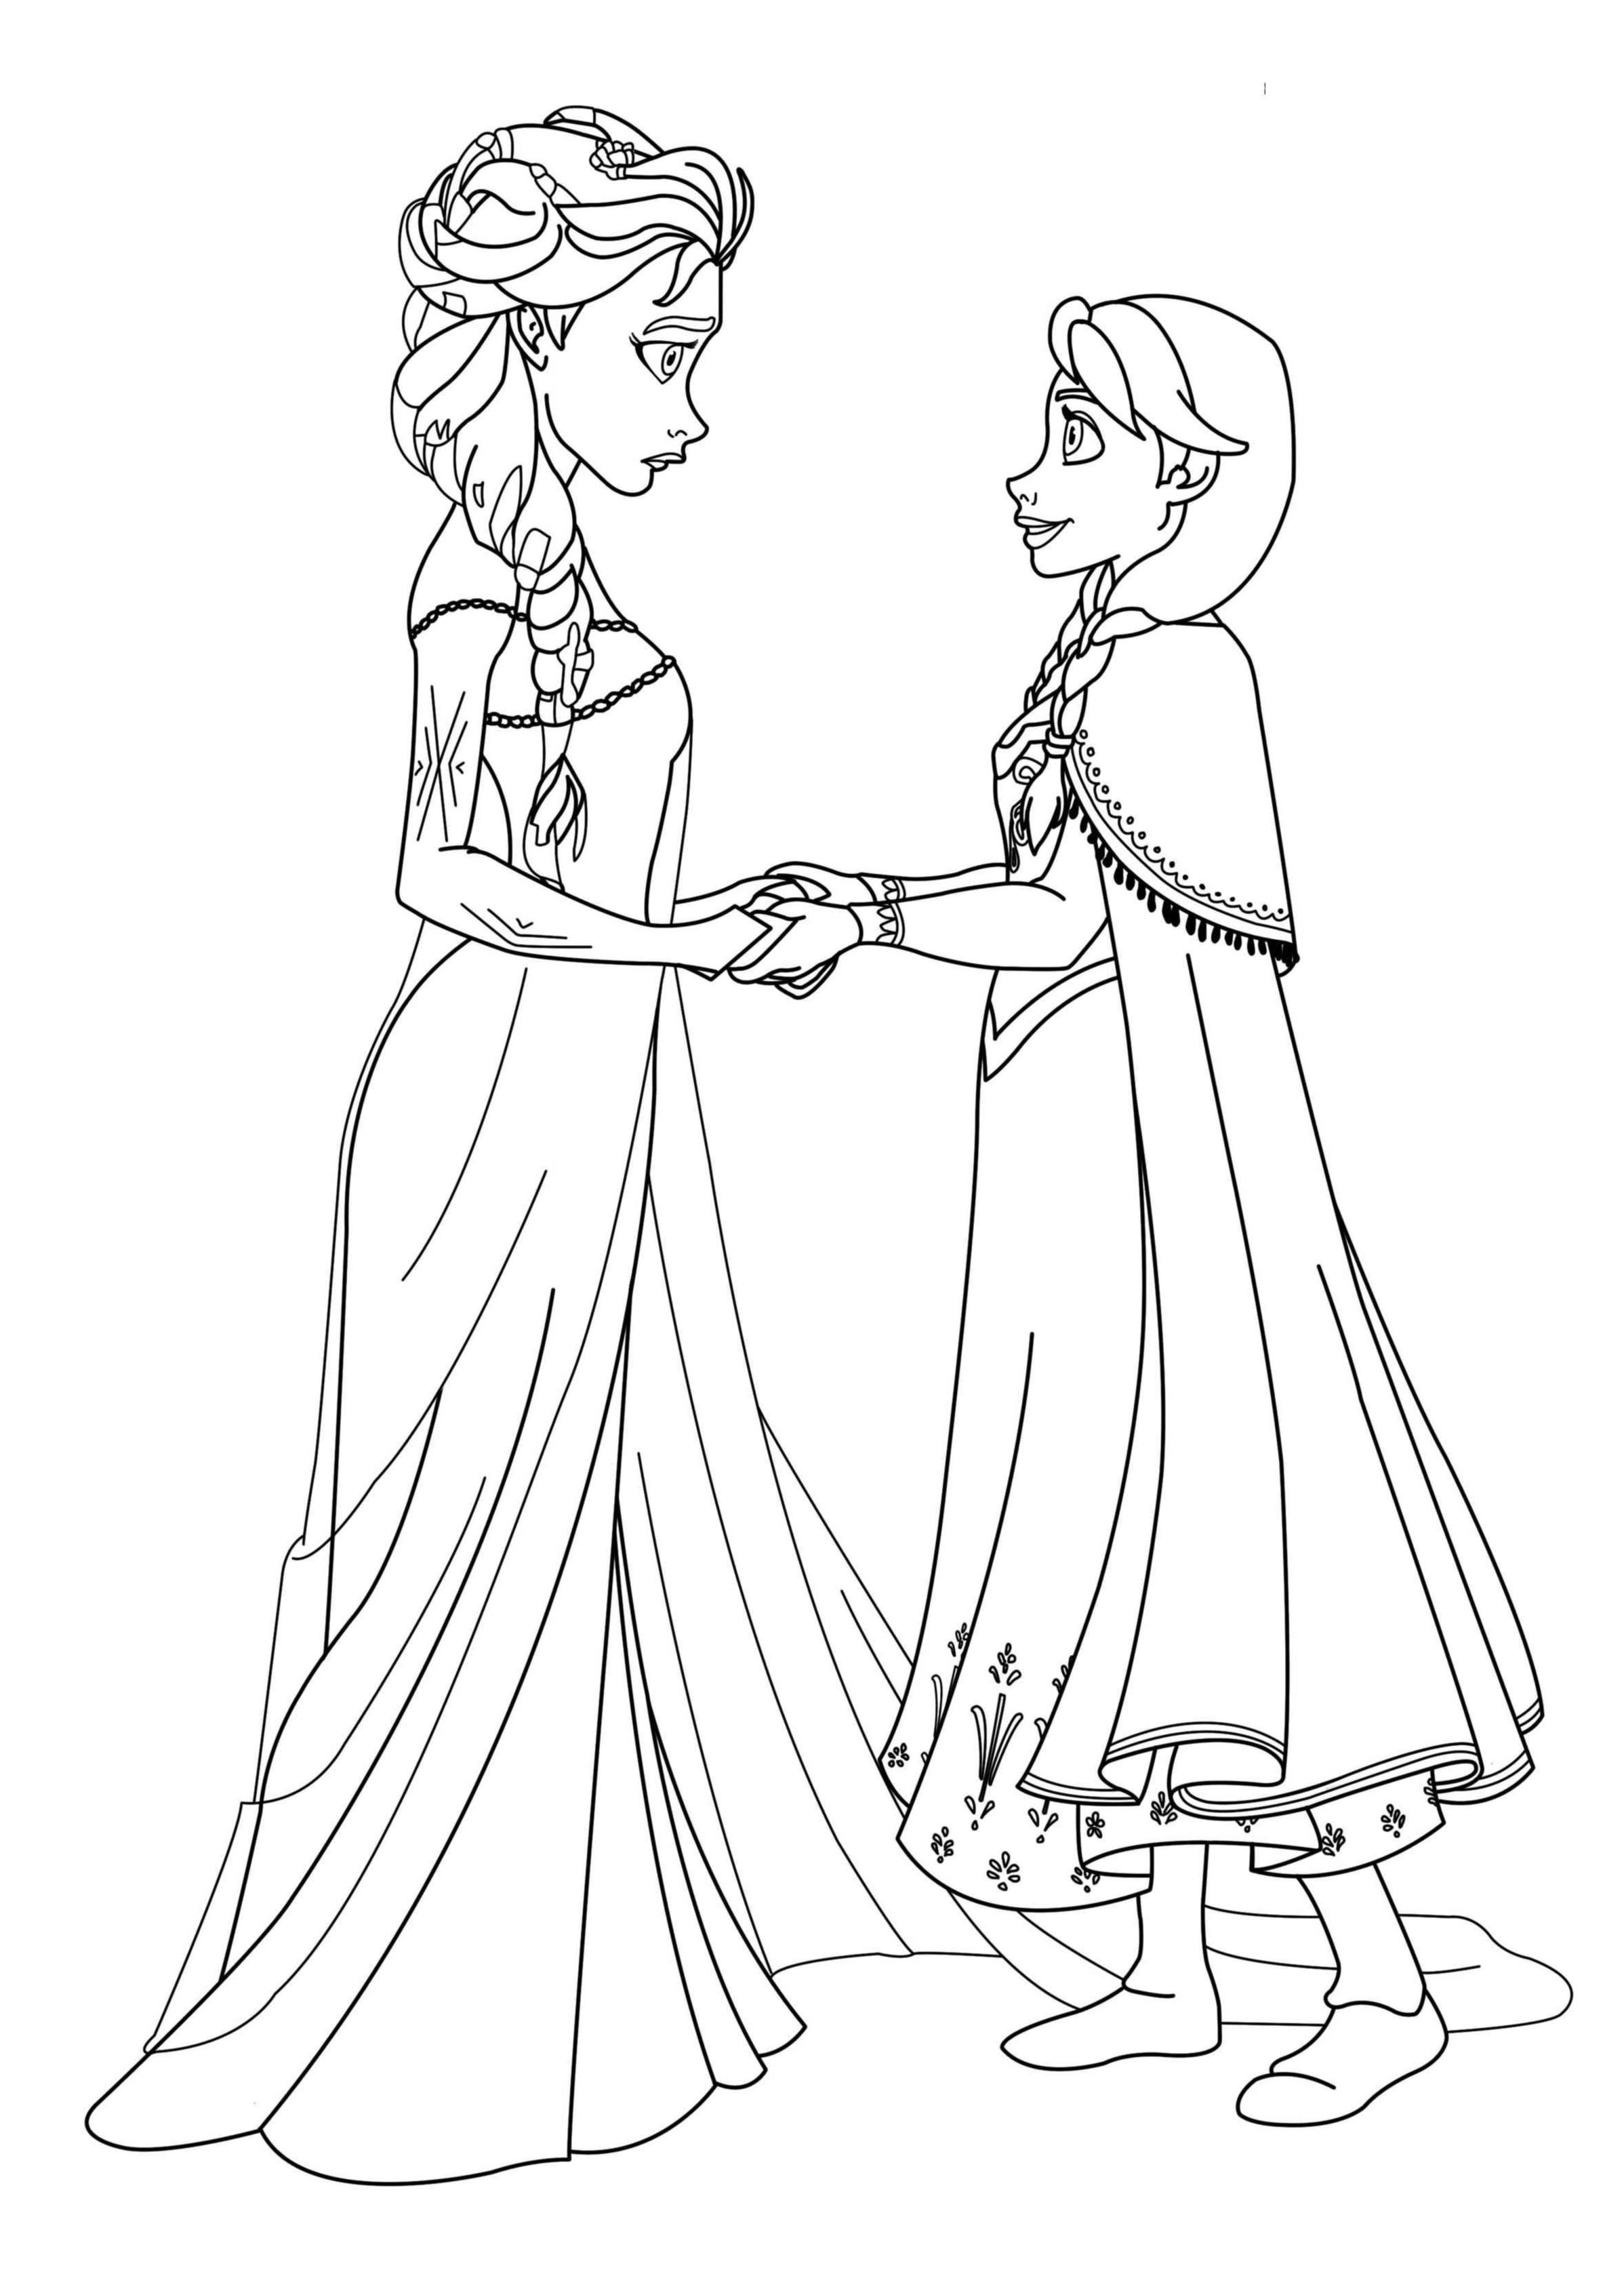 frozen-characters-coloring-pages-frozen-kids-coloring-pages